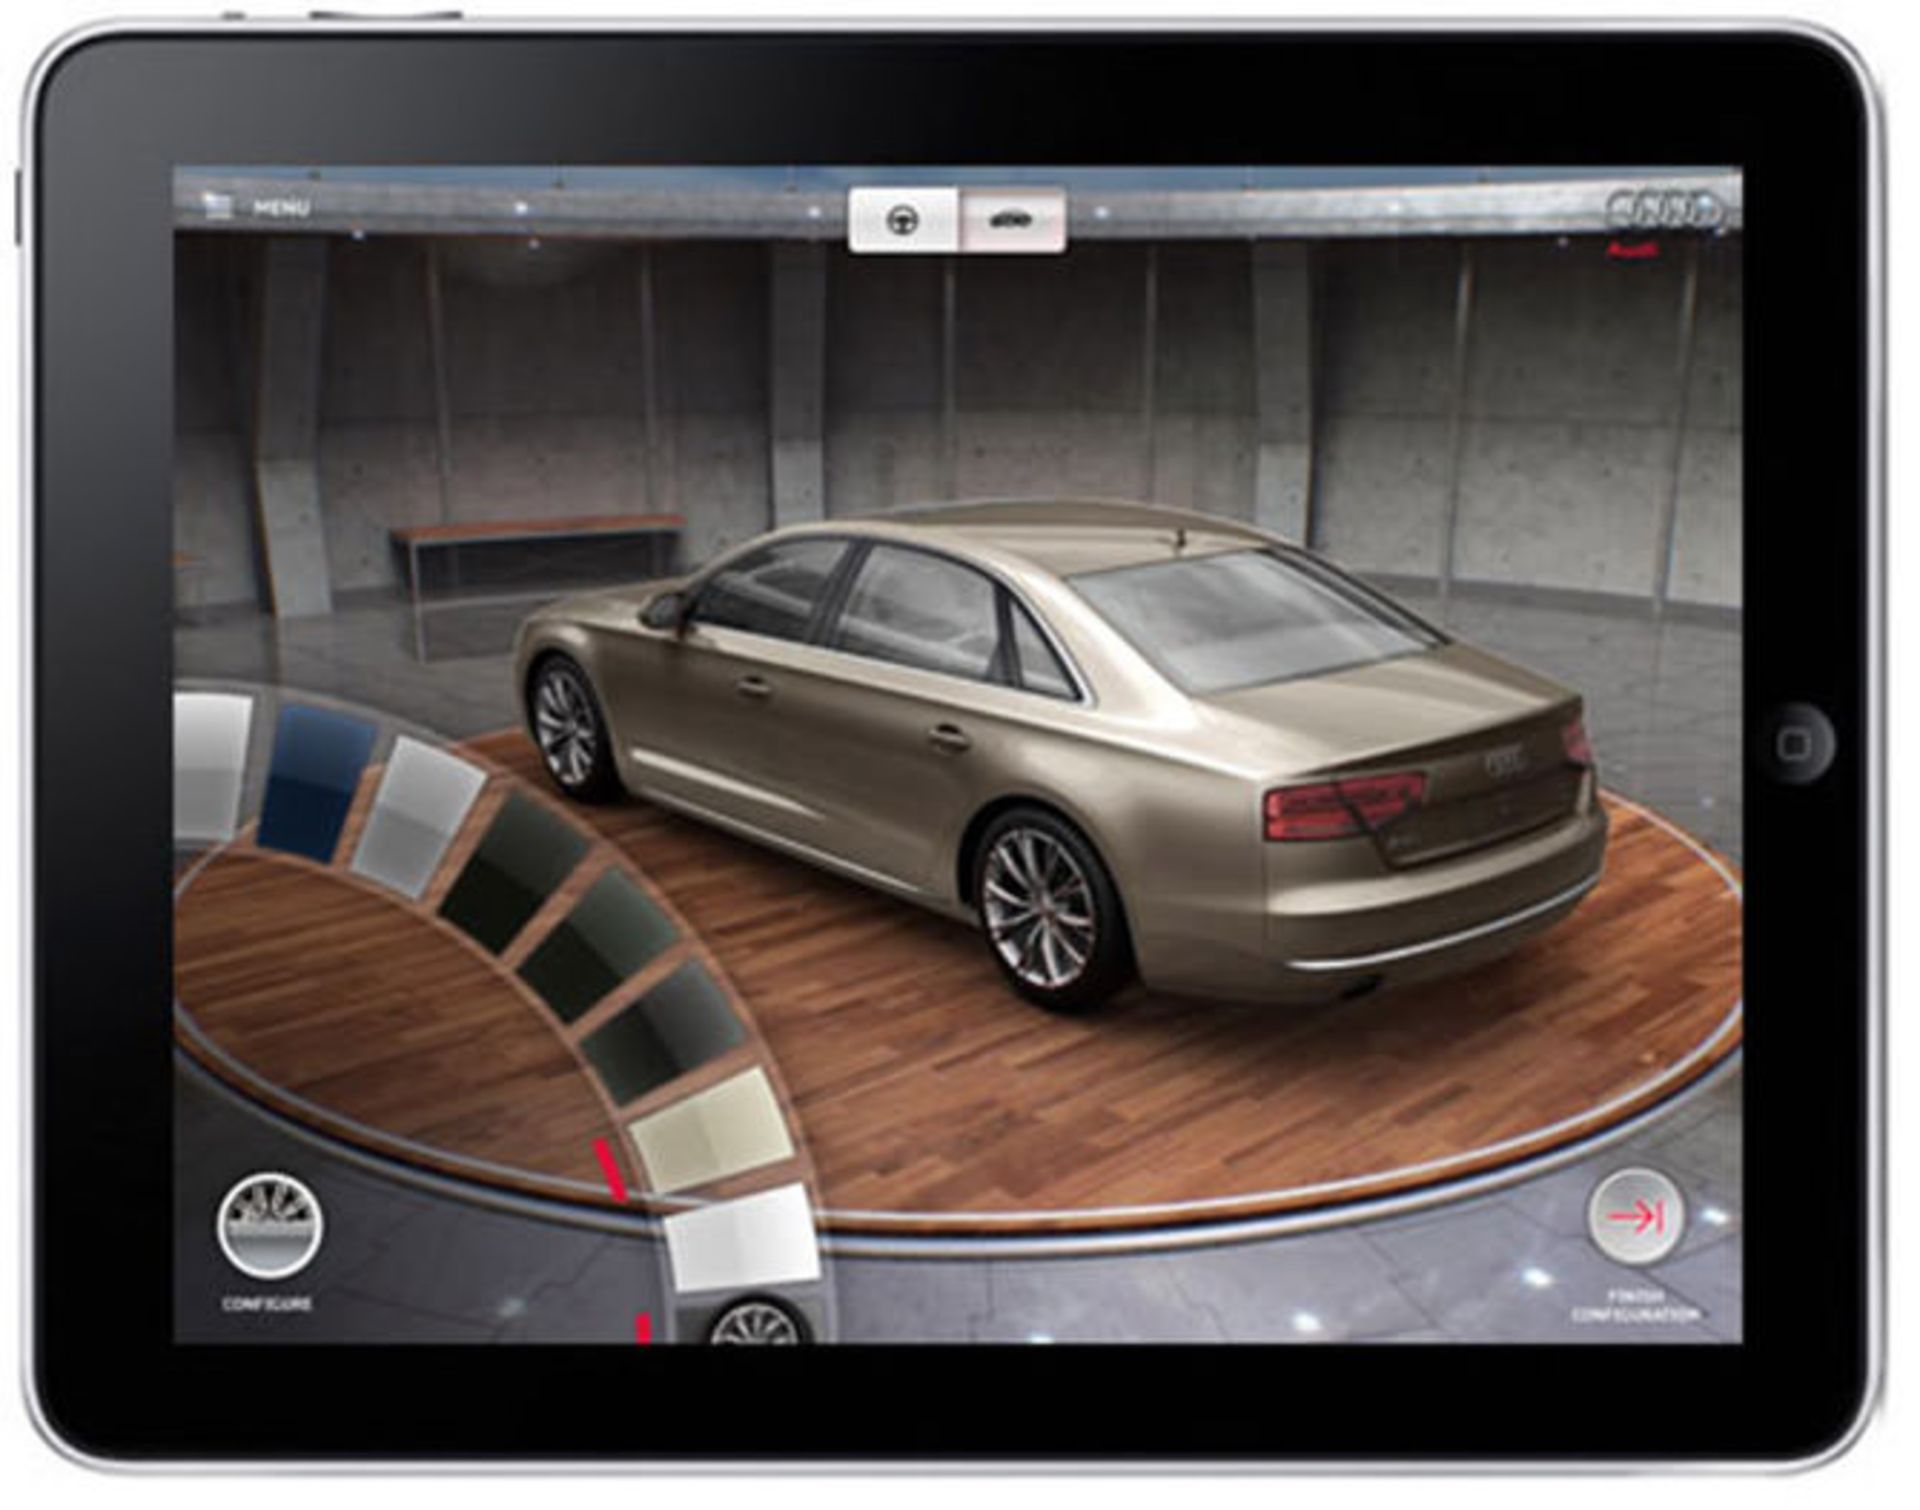 audi-a8-experience-app-for-ipad 100331405 m